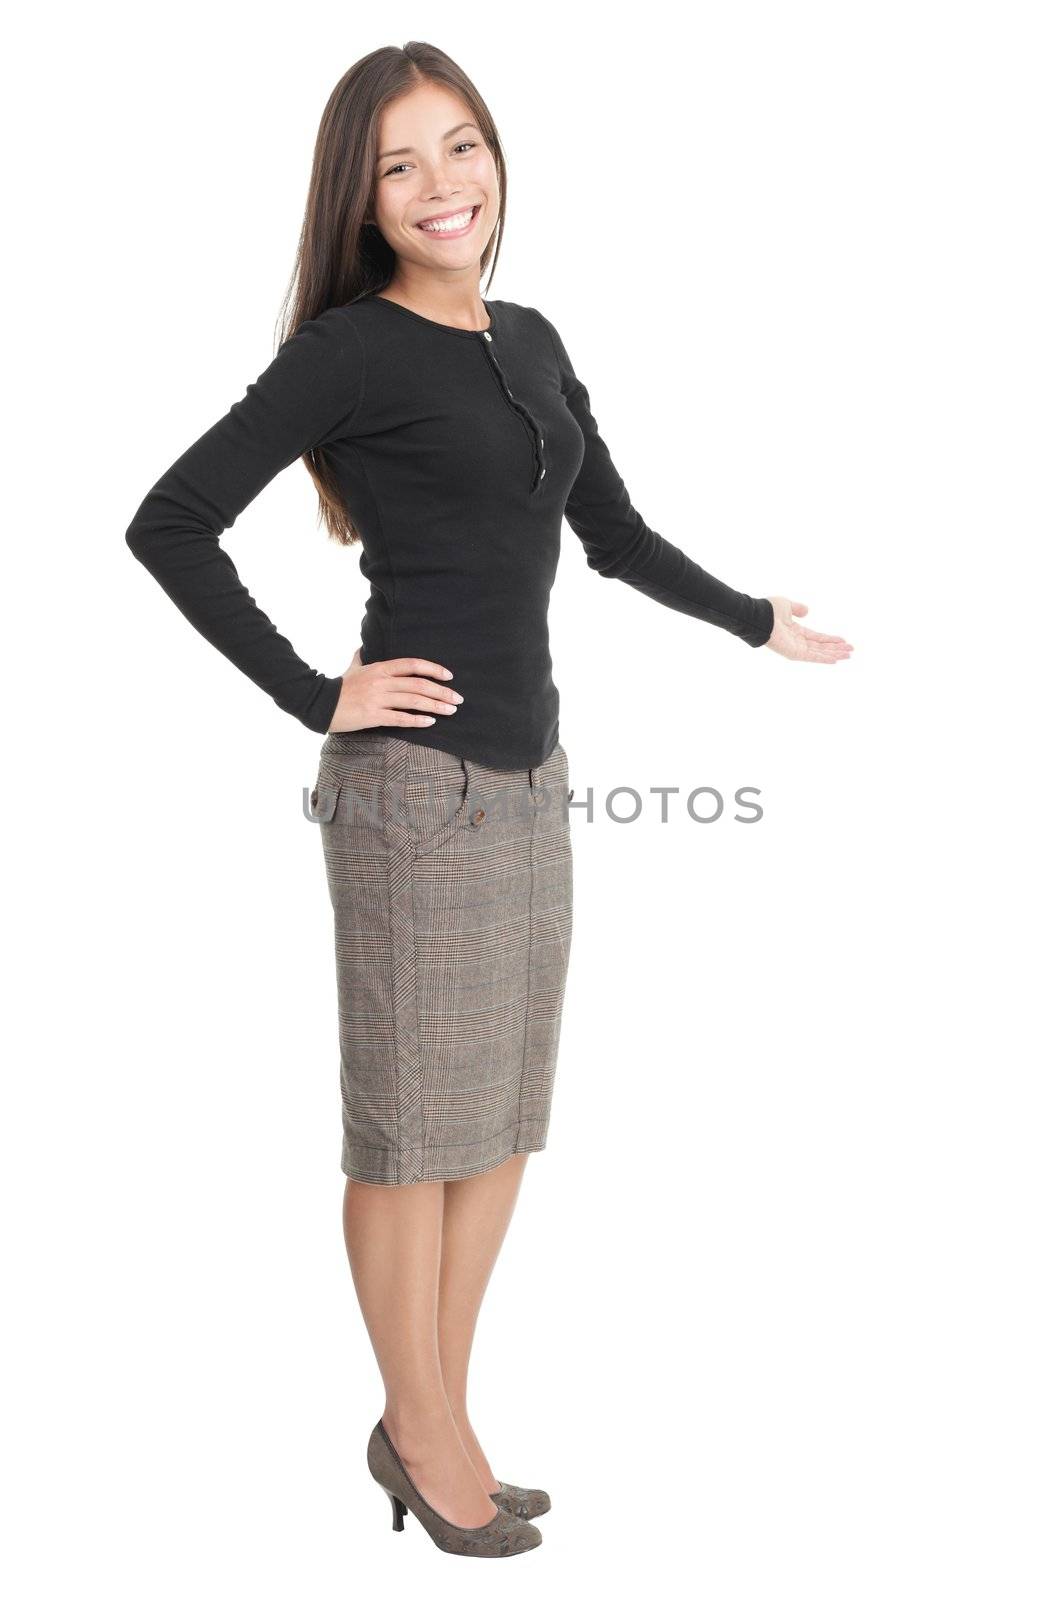 Casual businesswoman welcome gesture. Gorgeous kind looking young mixed race chinese / caucasian woman. Isolated on white background.